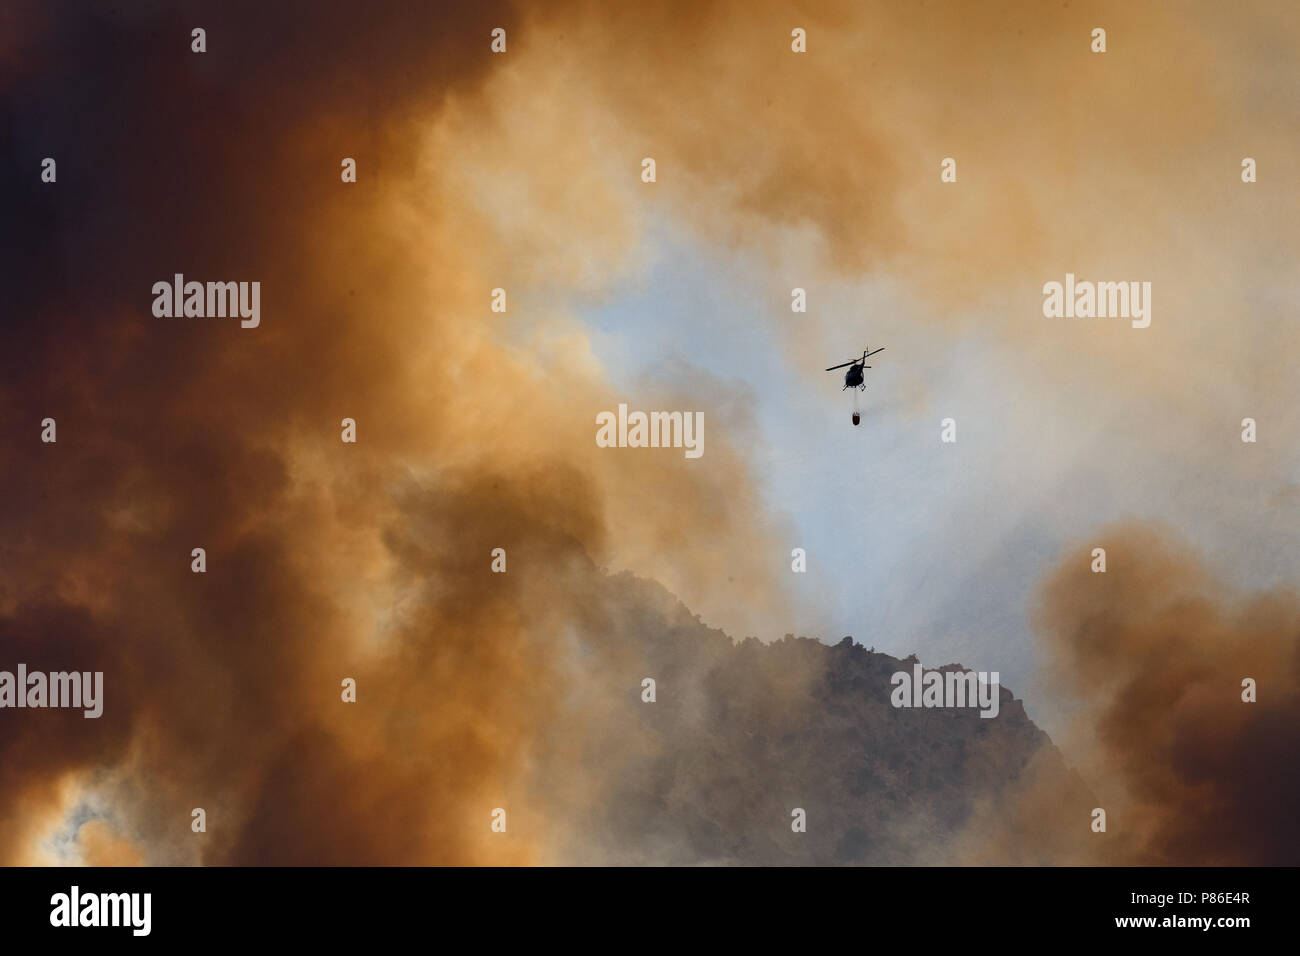 Alabama Hills, Lone Pine, CA. July 8, 2018. A helicopter combats the Georges Fire in the Alabama Hills west of Lone Pine, CA in eastern Sierra Nevadas.  The cause is under investigation. Lightning had been observed in the area. Fire crews from Inyo National Forest, the Bureau of Land Management (BLM),  CALFIRE, and local fire departments are fighting the fire with assistance from air tankers and helicopters. The helicopters are drawing water from the nearby California aquaduct. Stock Photo